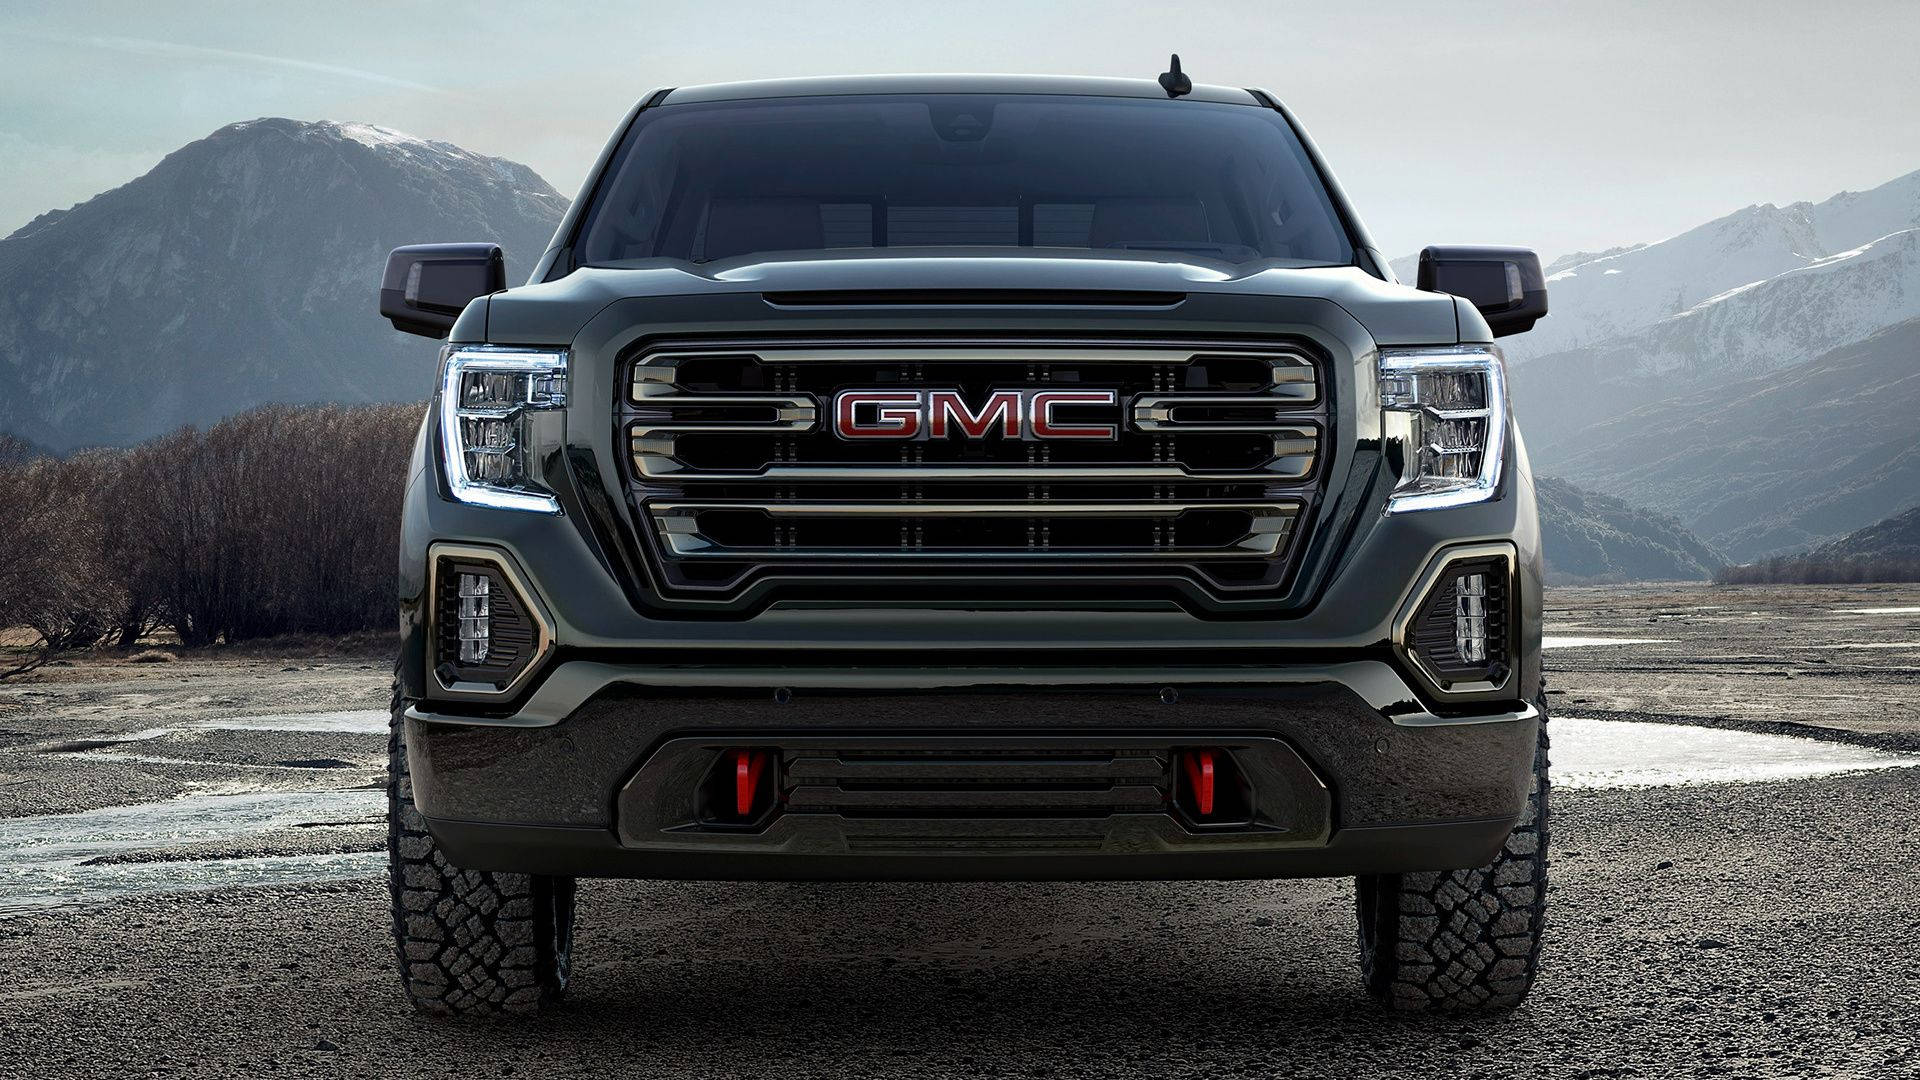 Free Gmc Wallpaper Downloads, [100+] Gmc Wallpapers for FREE | Wallpapers .com